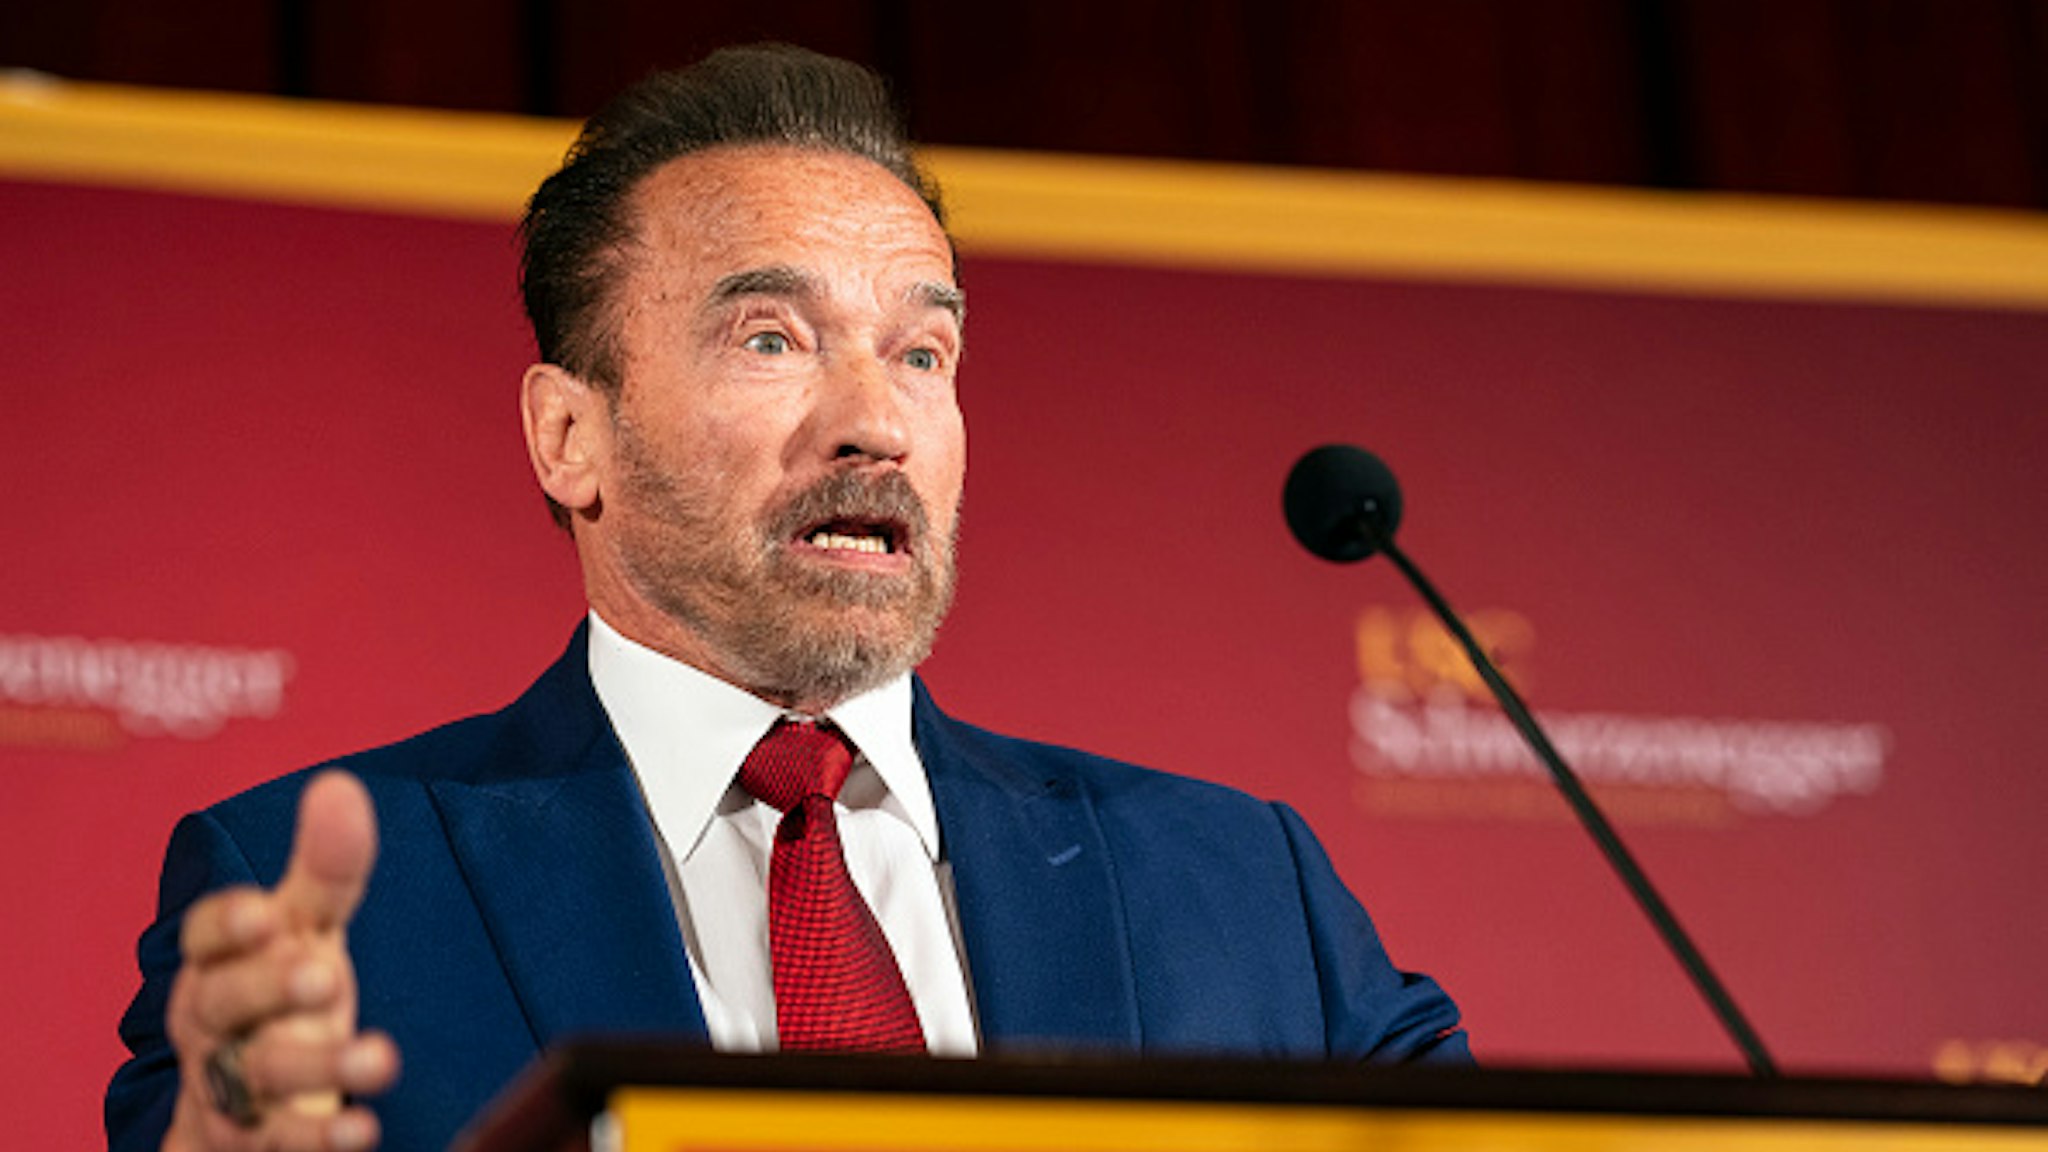 LOS ANGELES, UNITED STATES - FEBRUARY 13, 2020: Former Gov. Arnold Schwarzenegger speaks during a Homelessness Symposium at USC in Los Angeles. The event was held at the USC Schwarzenegger Institute and examined solutions to homelessness in California.-